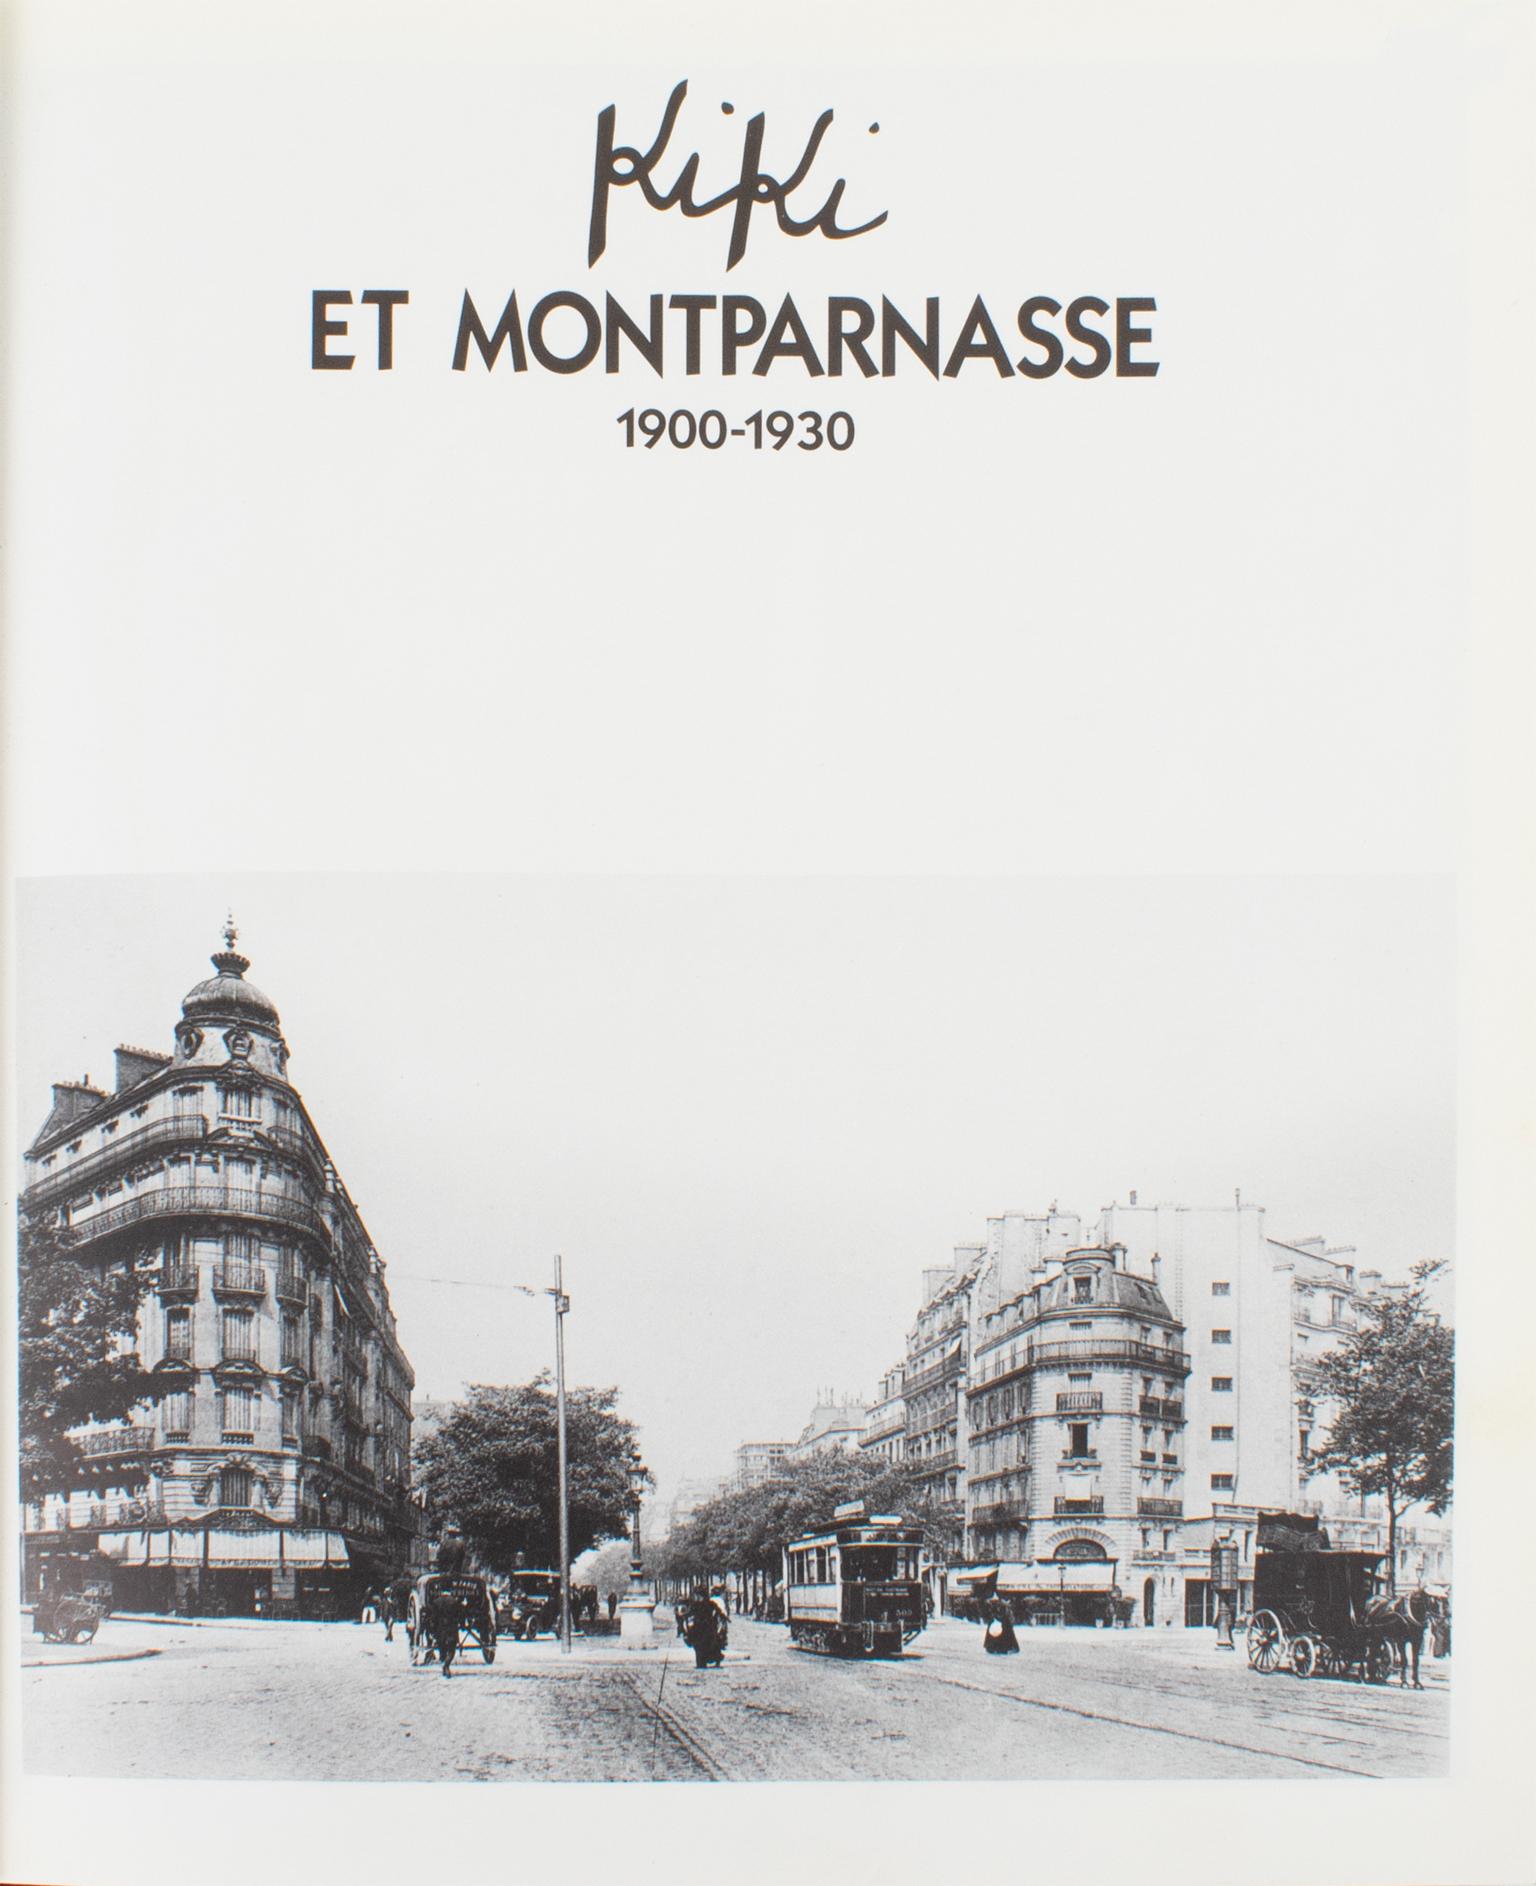 Kiki et Montparnasse 1900-1930 (Kiki and Montparnasse 1900-1930), a French book by Billy Kluver and Julie Martin.
Kiki Montparnasse or the ennobled bohemian. The surprising story tells when a bohemian genius made a district of Paris the capital of